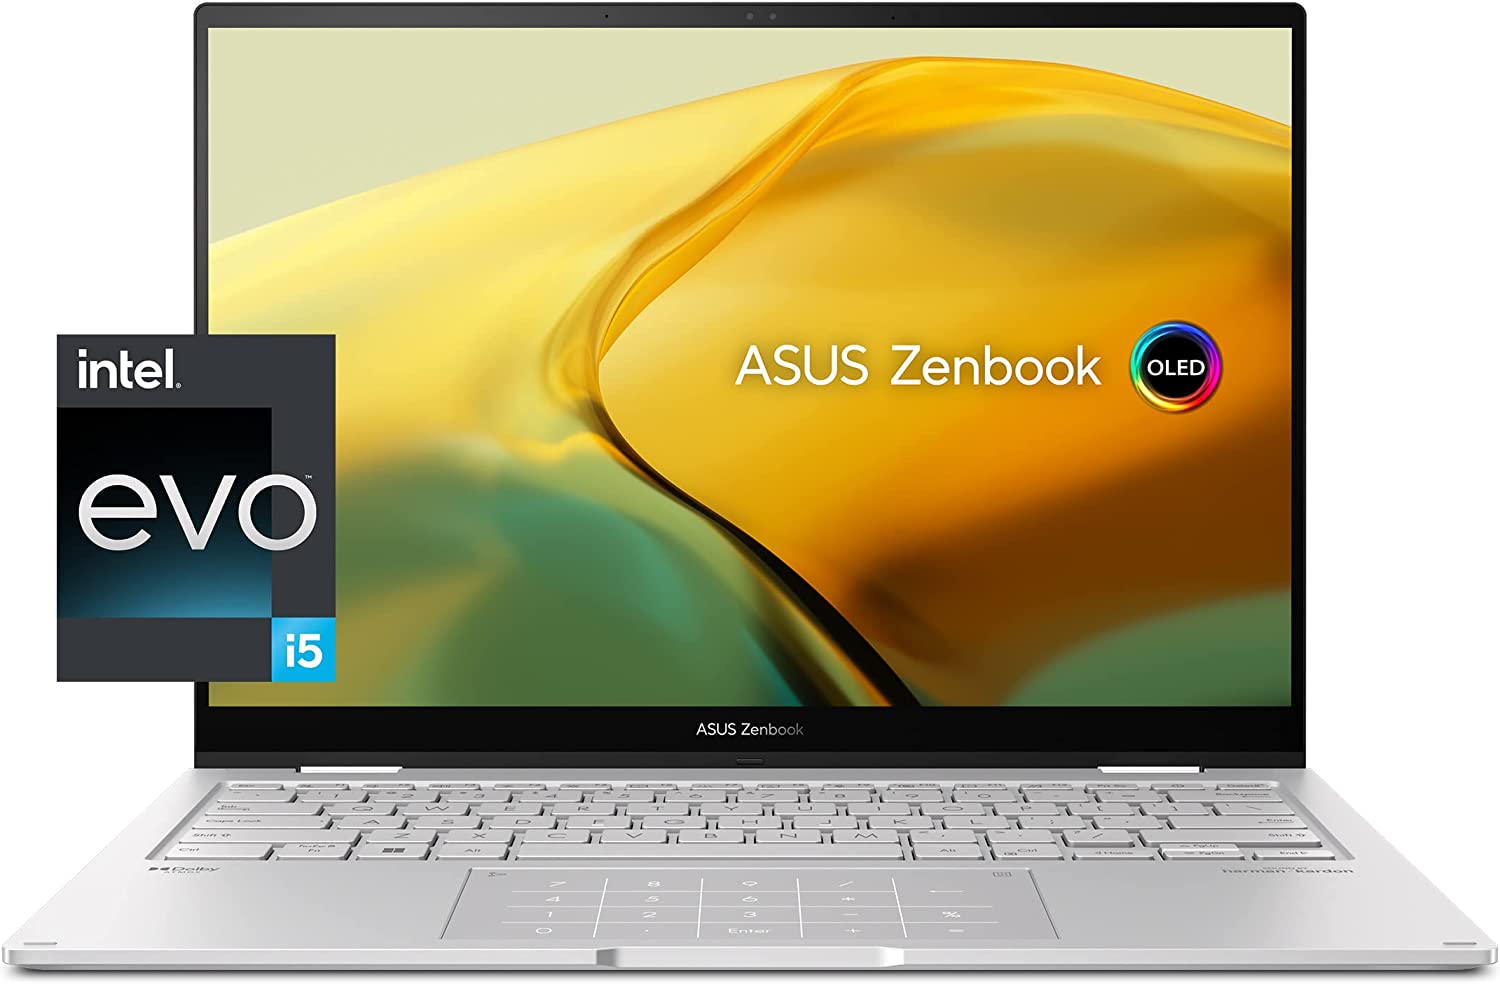 ASUS Zenbook 14 OLED: Your Next Must-Have Premium Laptop for Work &  Entertainment - ClickTheCity